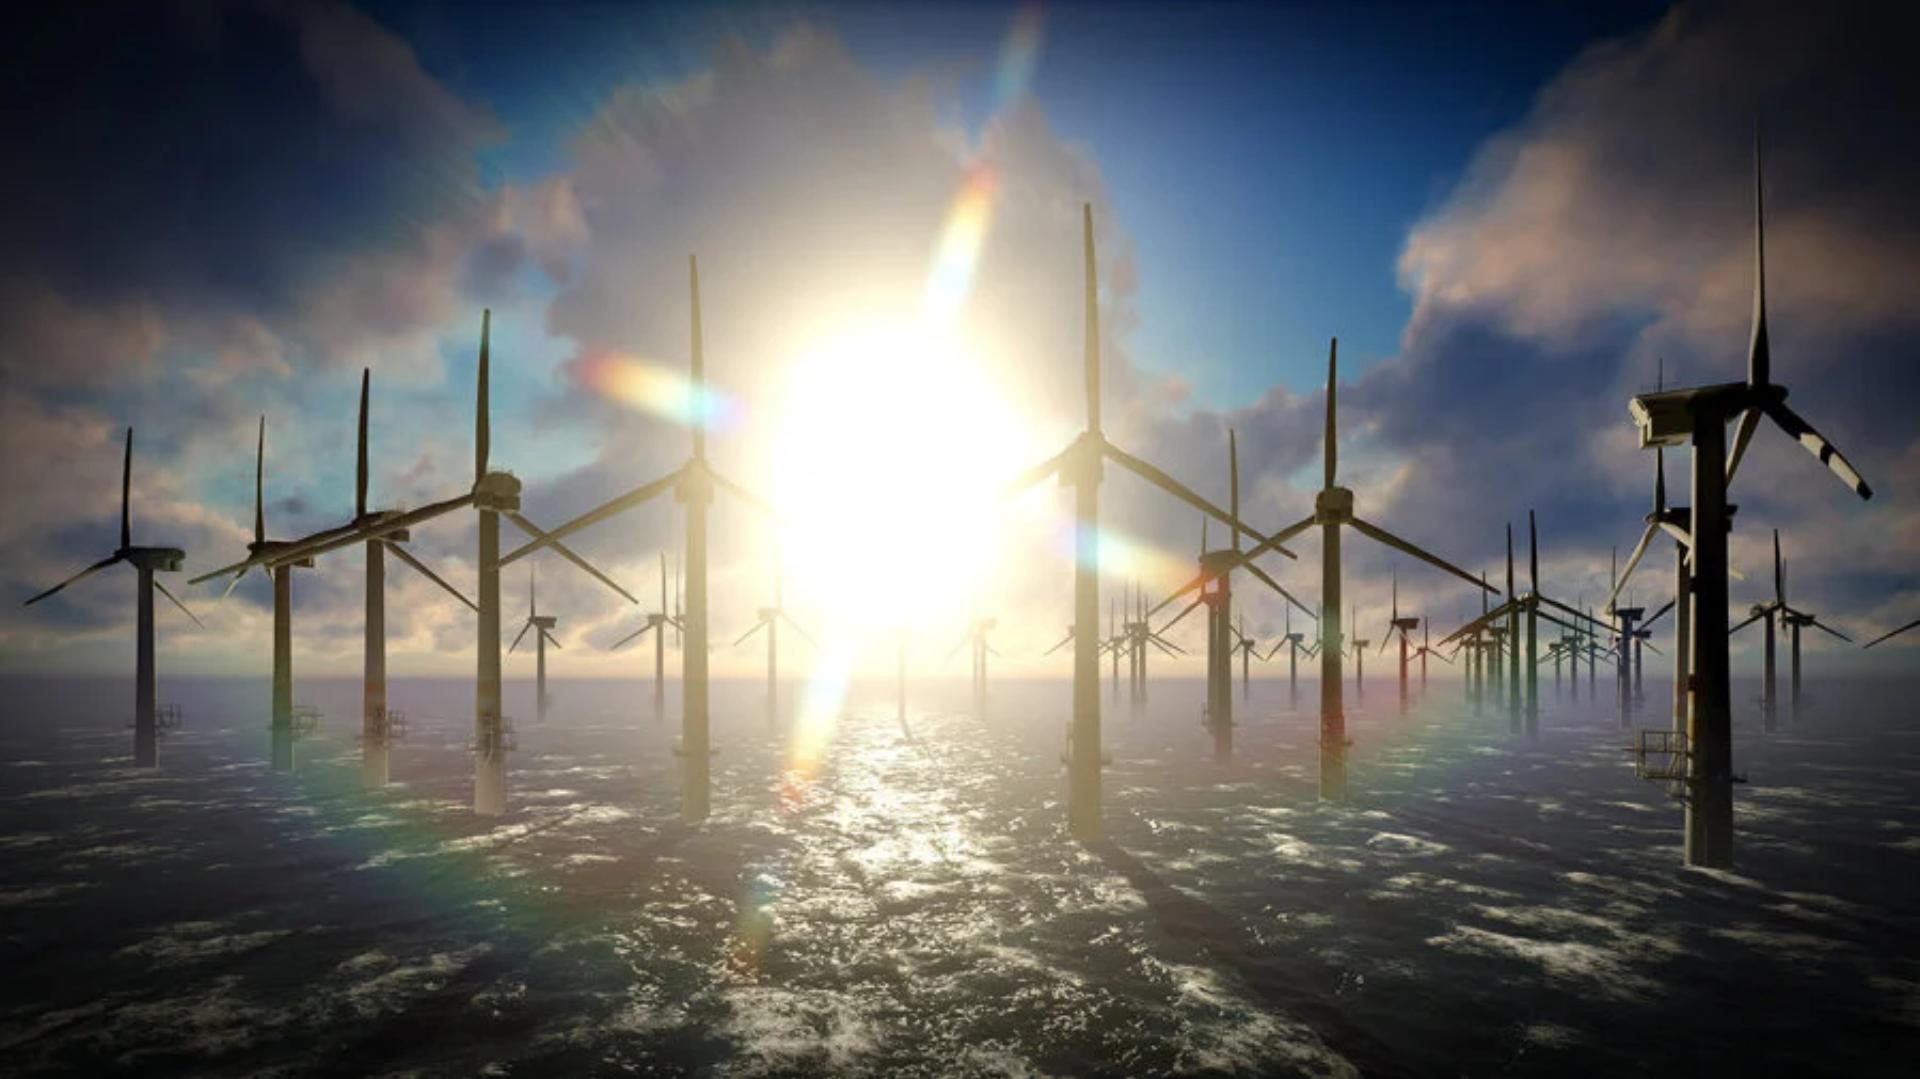 Offshore wind farms are a reliable source of green energy thanks to the strong, steady wind at sea.